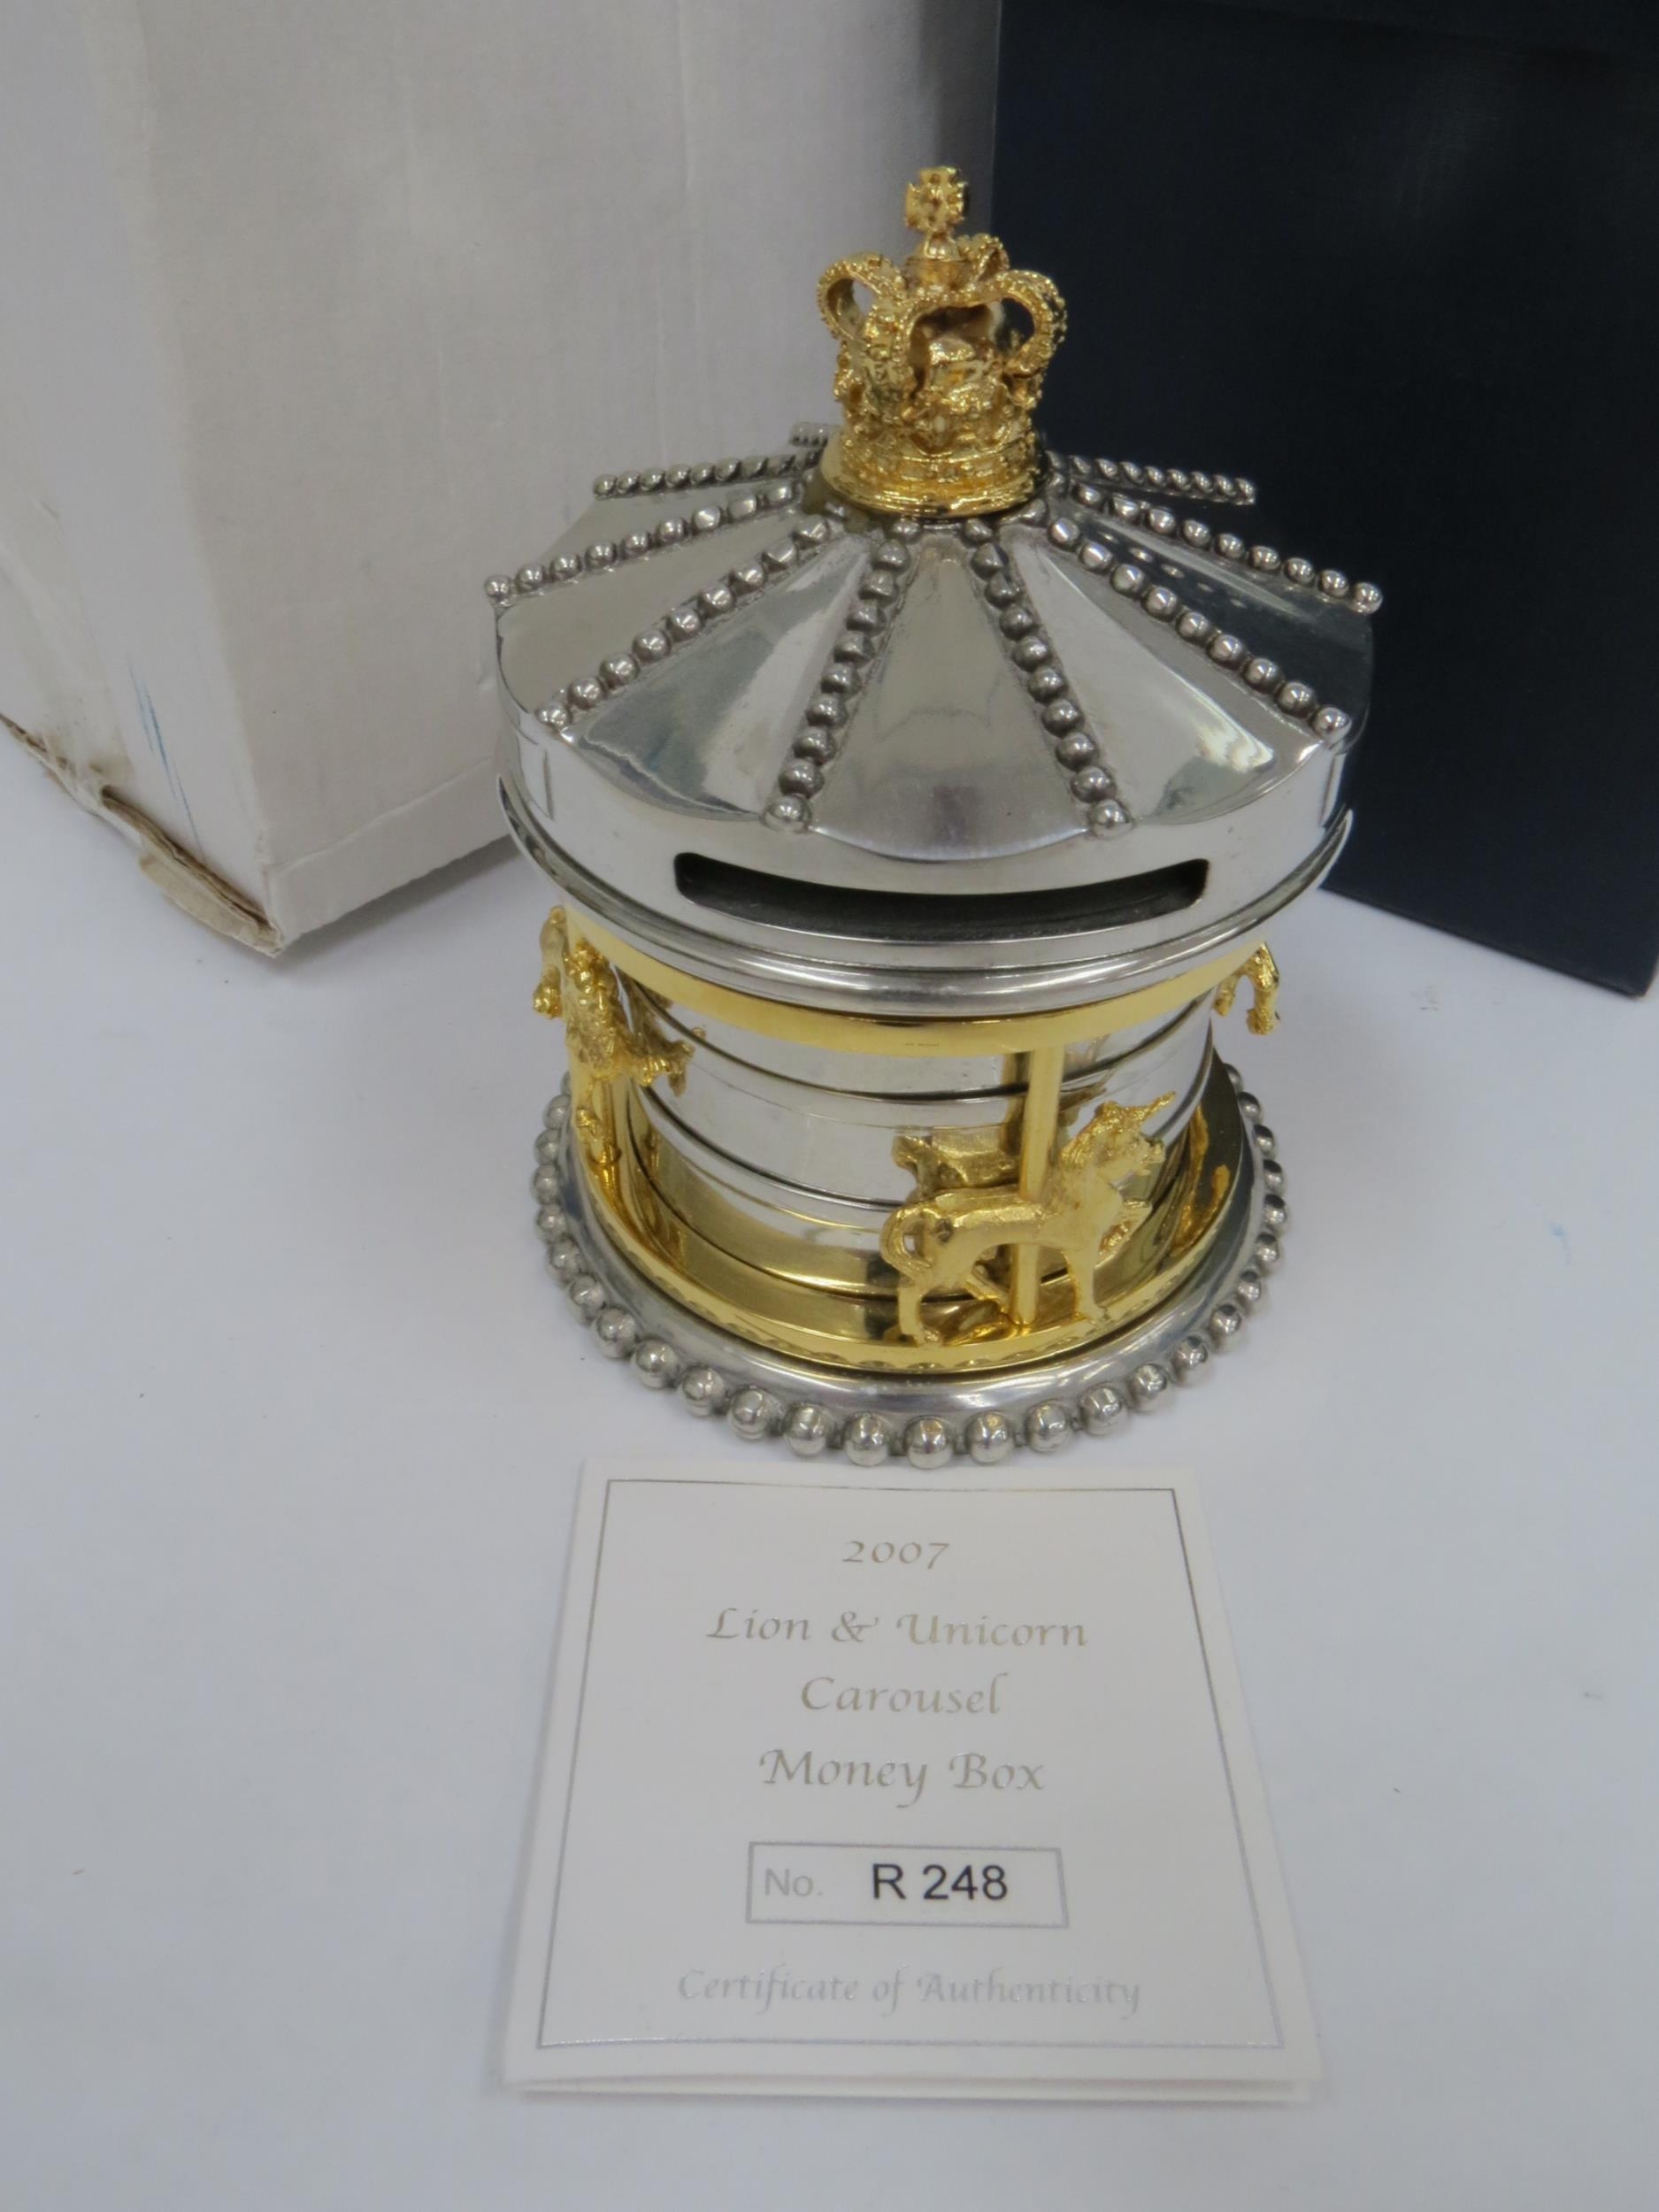 A Royal Mint "Lion & Unicon Carousel" money box in silver and pewter alloy with gold plating and set - Image 2 of 2